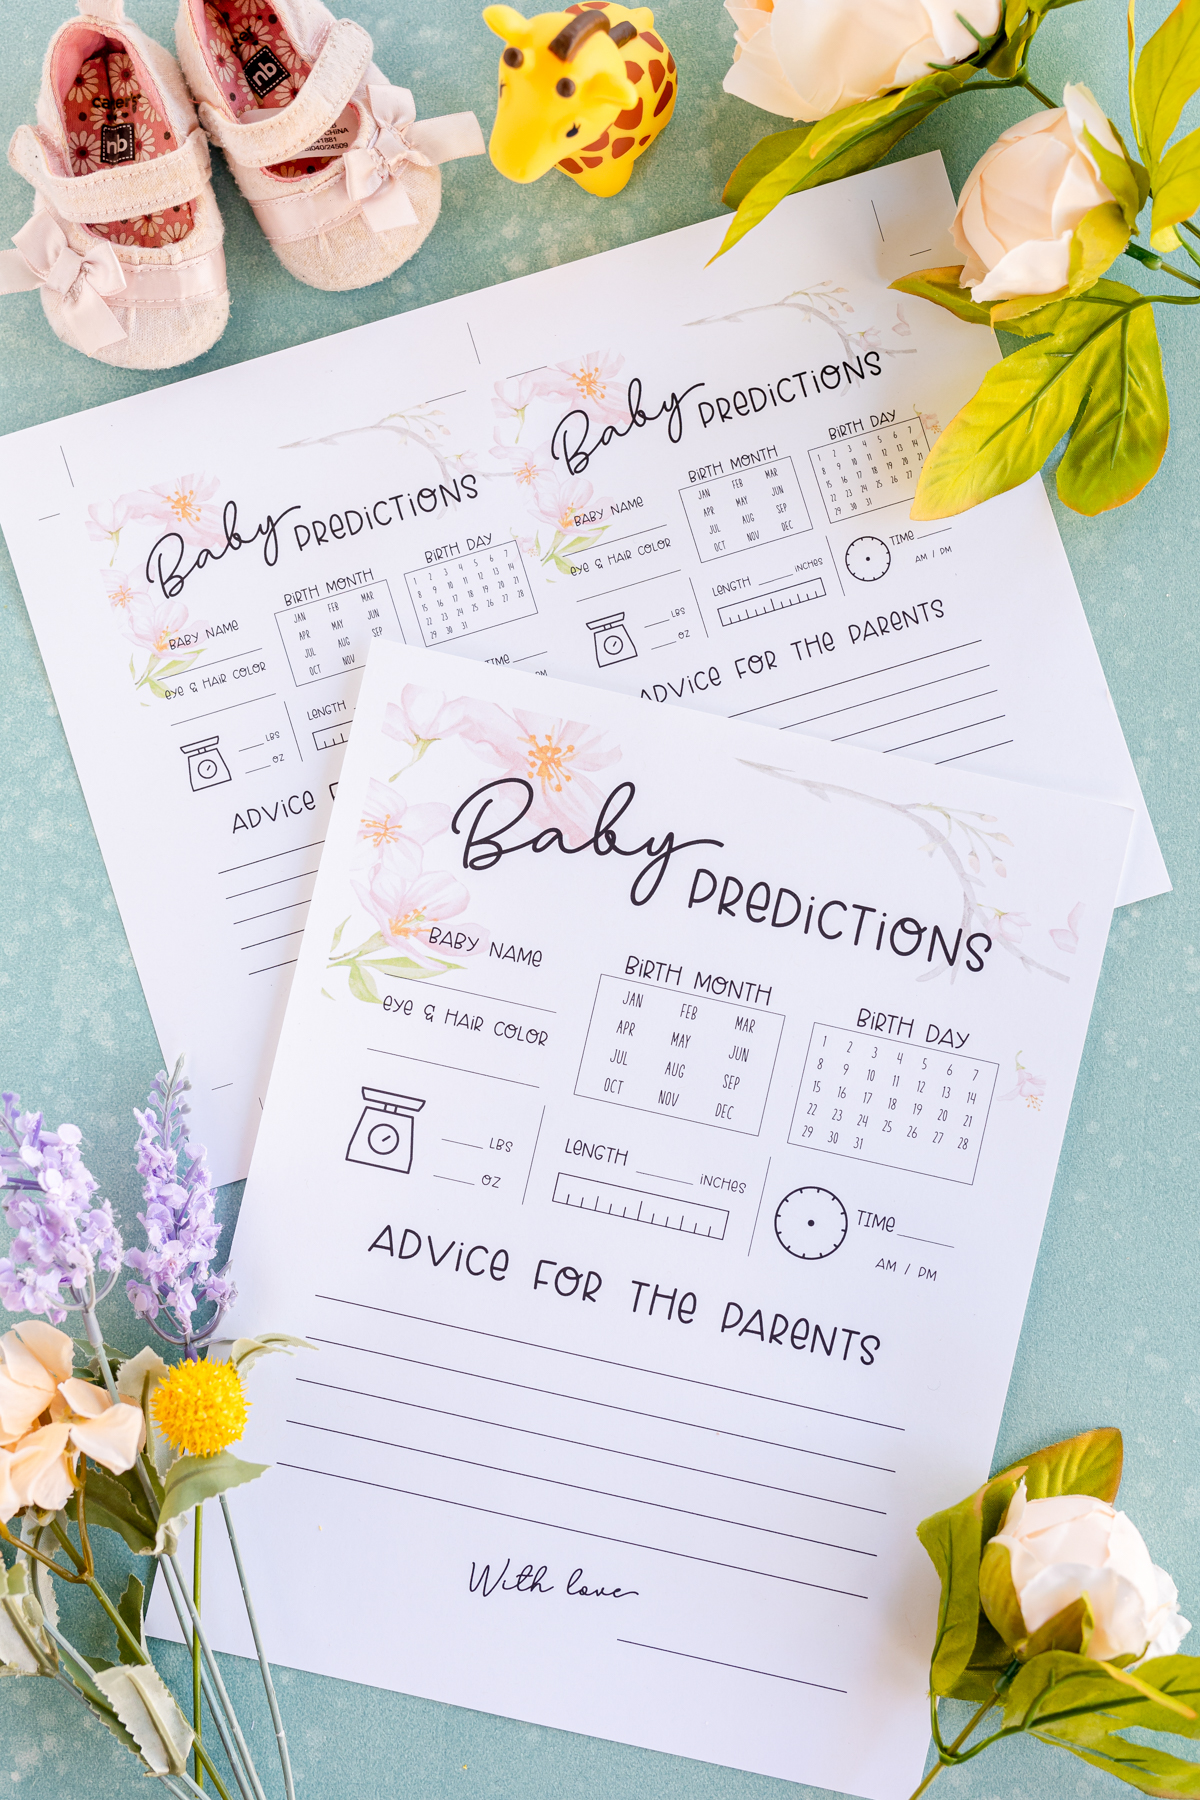 printed out baby shower predictions and advice cards